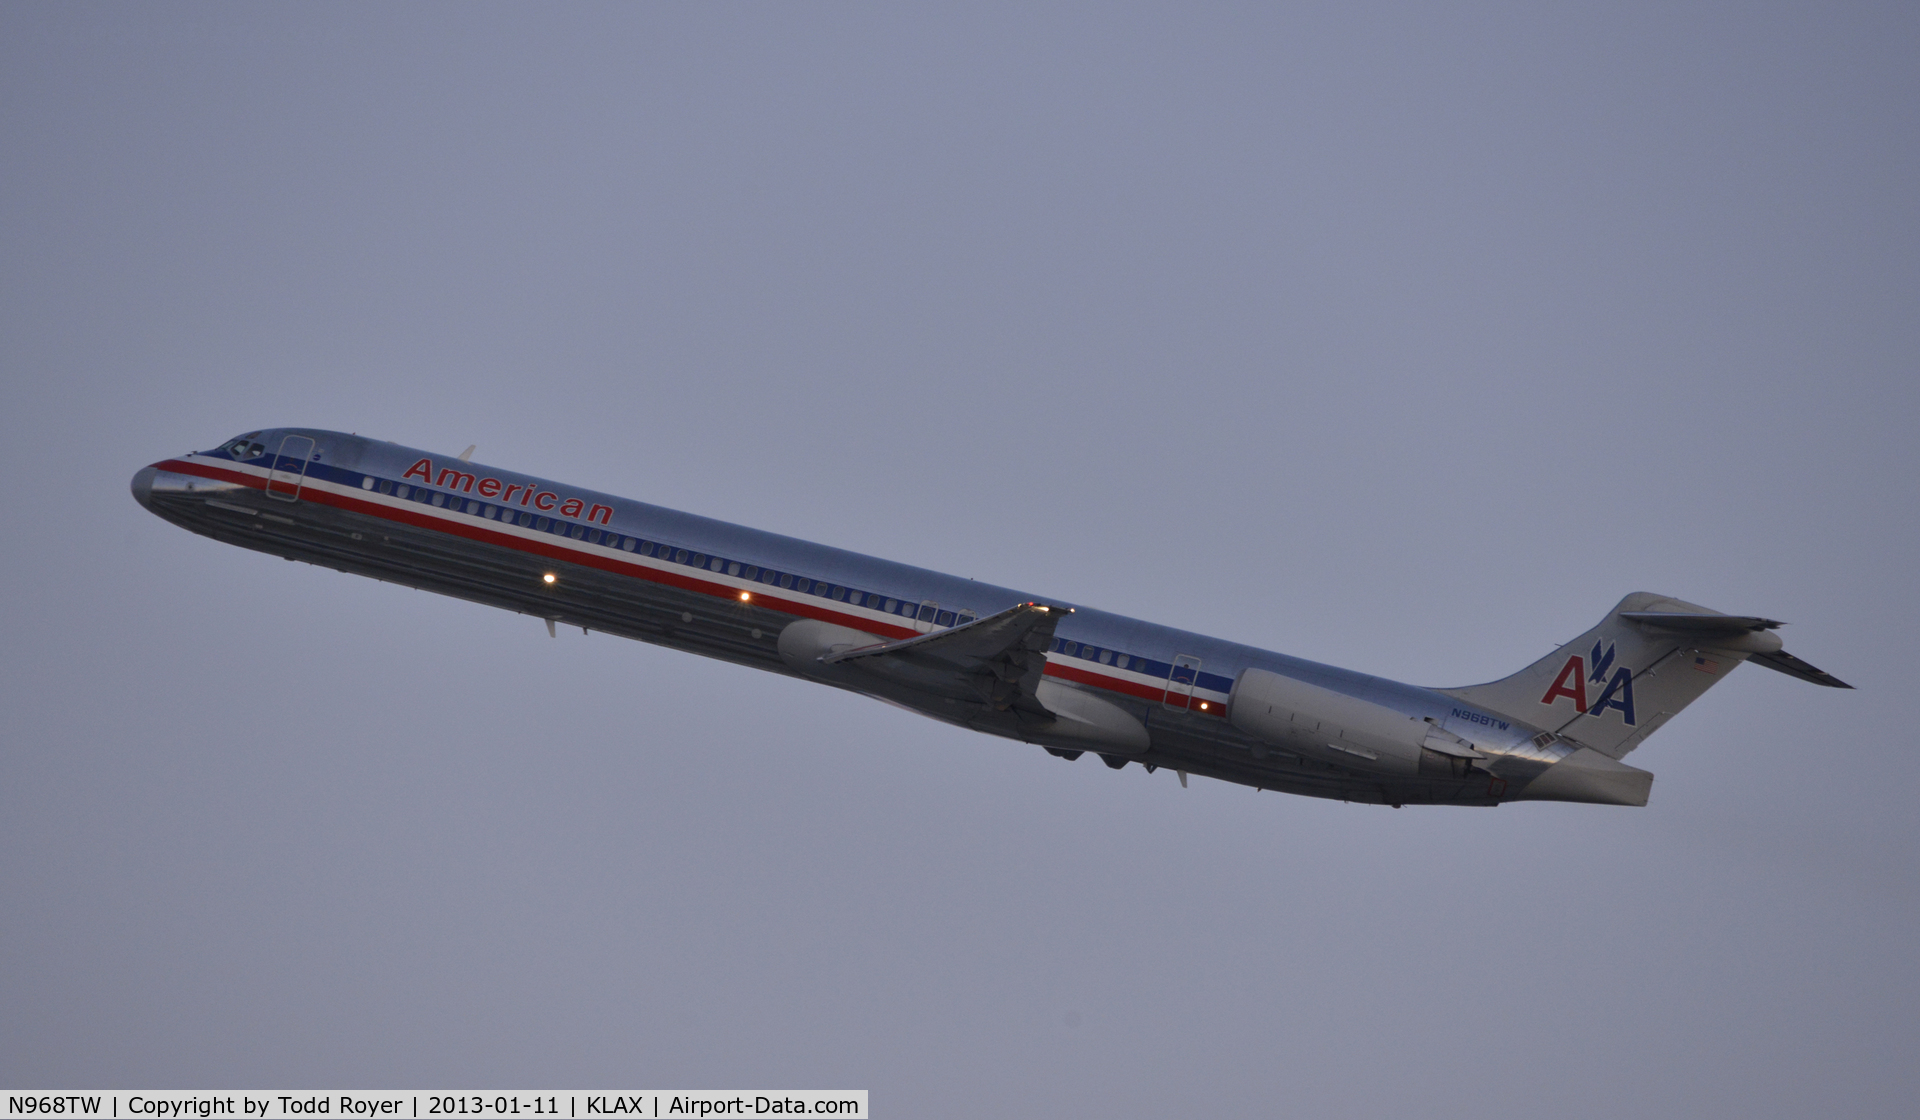 N968TW, 1999 McDonnell Douglas MD-83 (DC-9-83) C/N 53618, Early morning departure at LAX